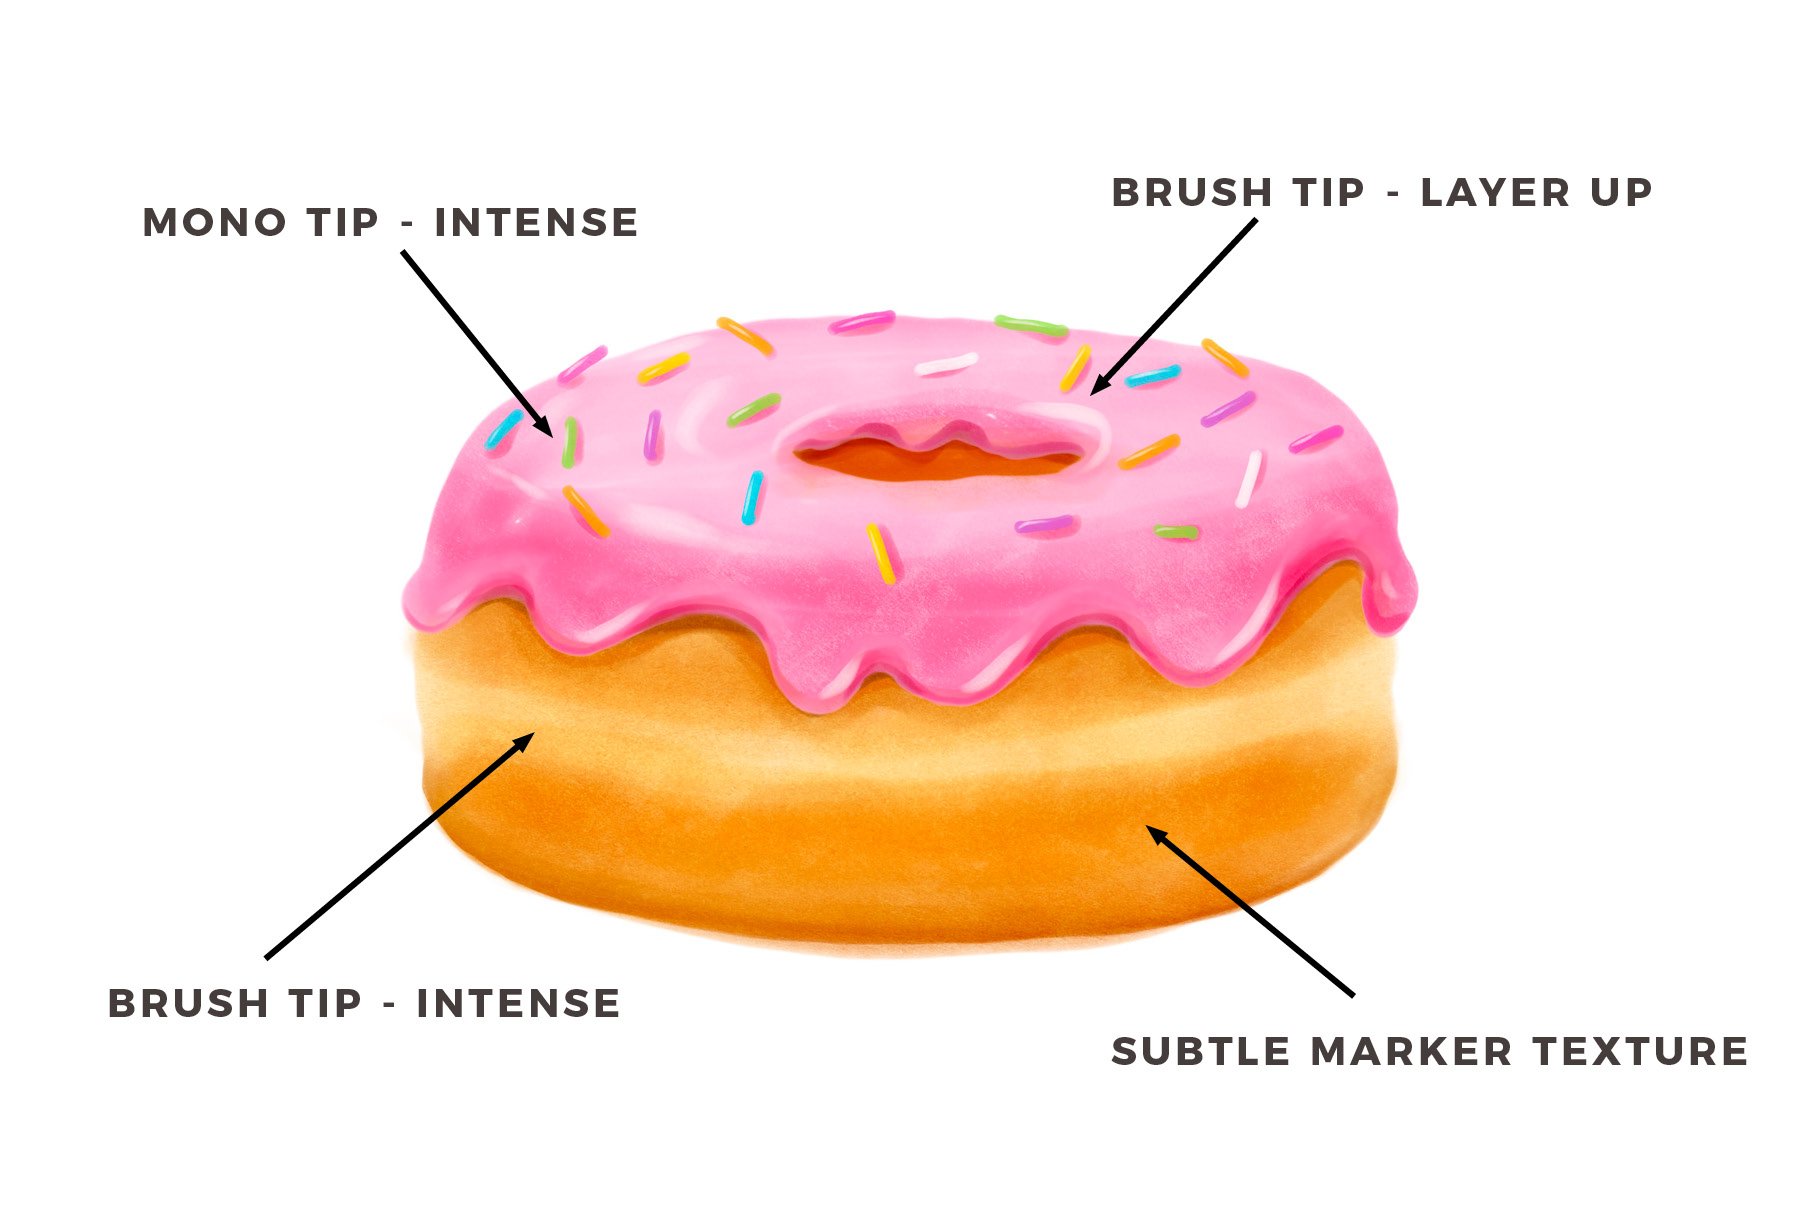 So tasty donut with a pink cover.